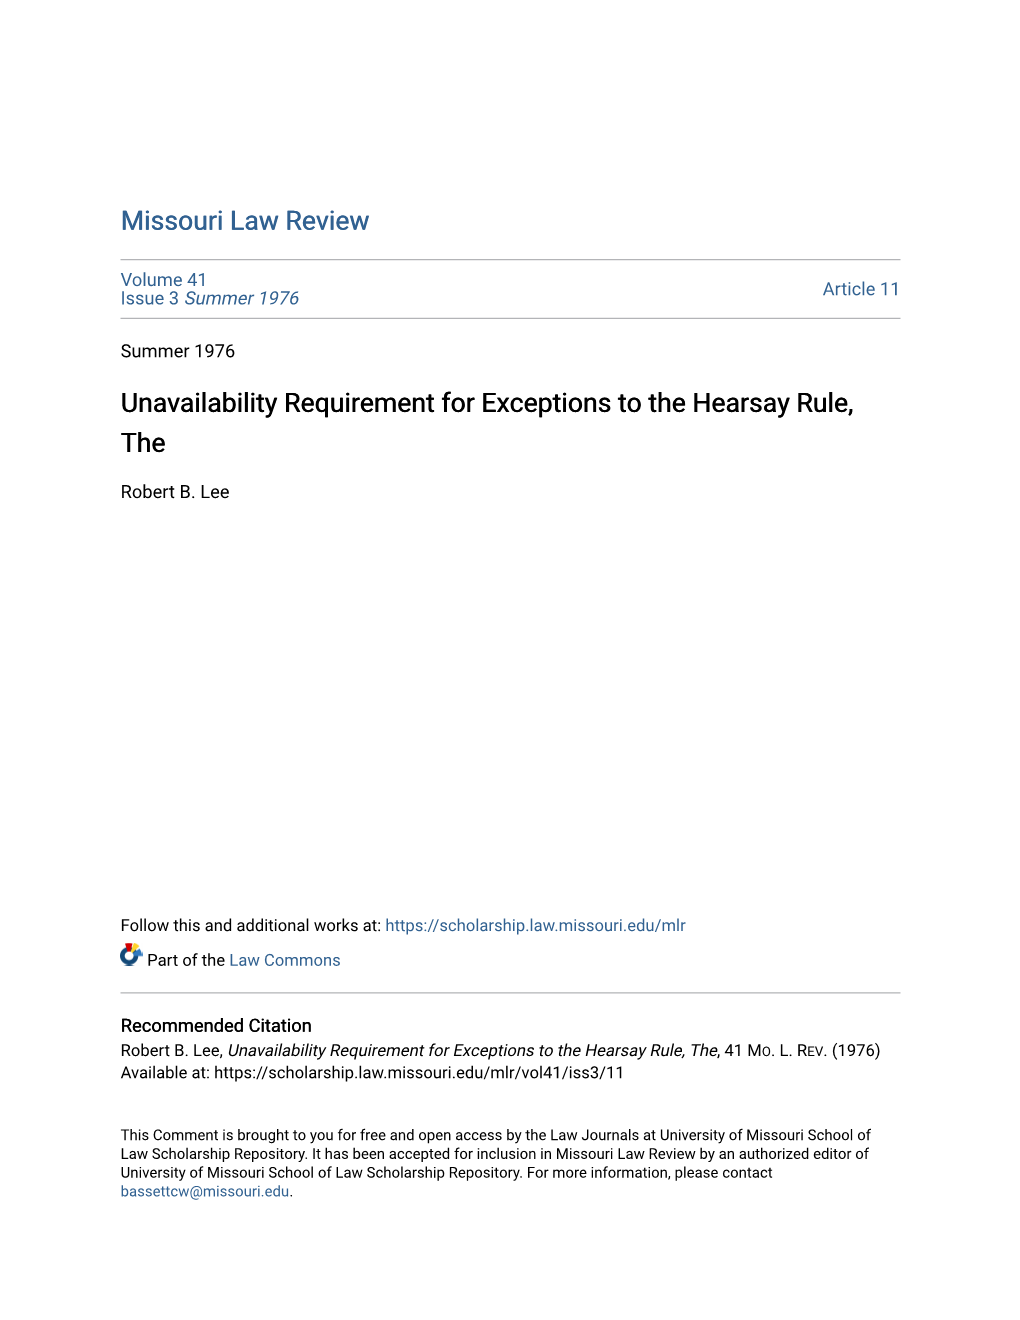 Unavailability Requirement for Exceptions to the Hearsay Rule, The